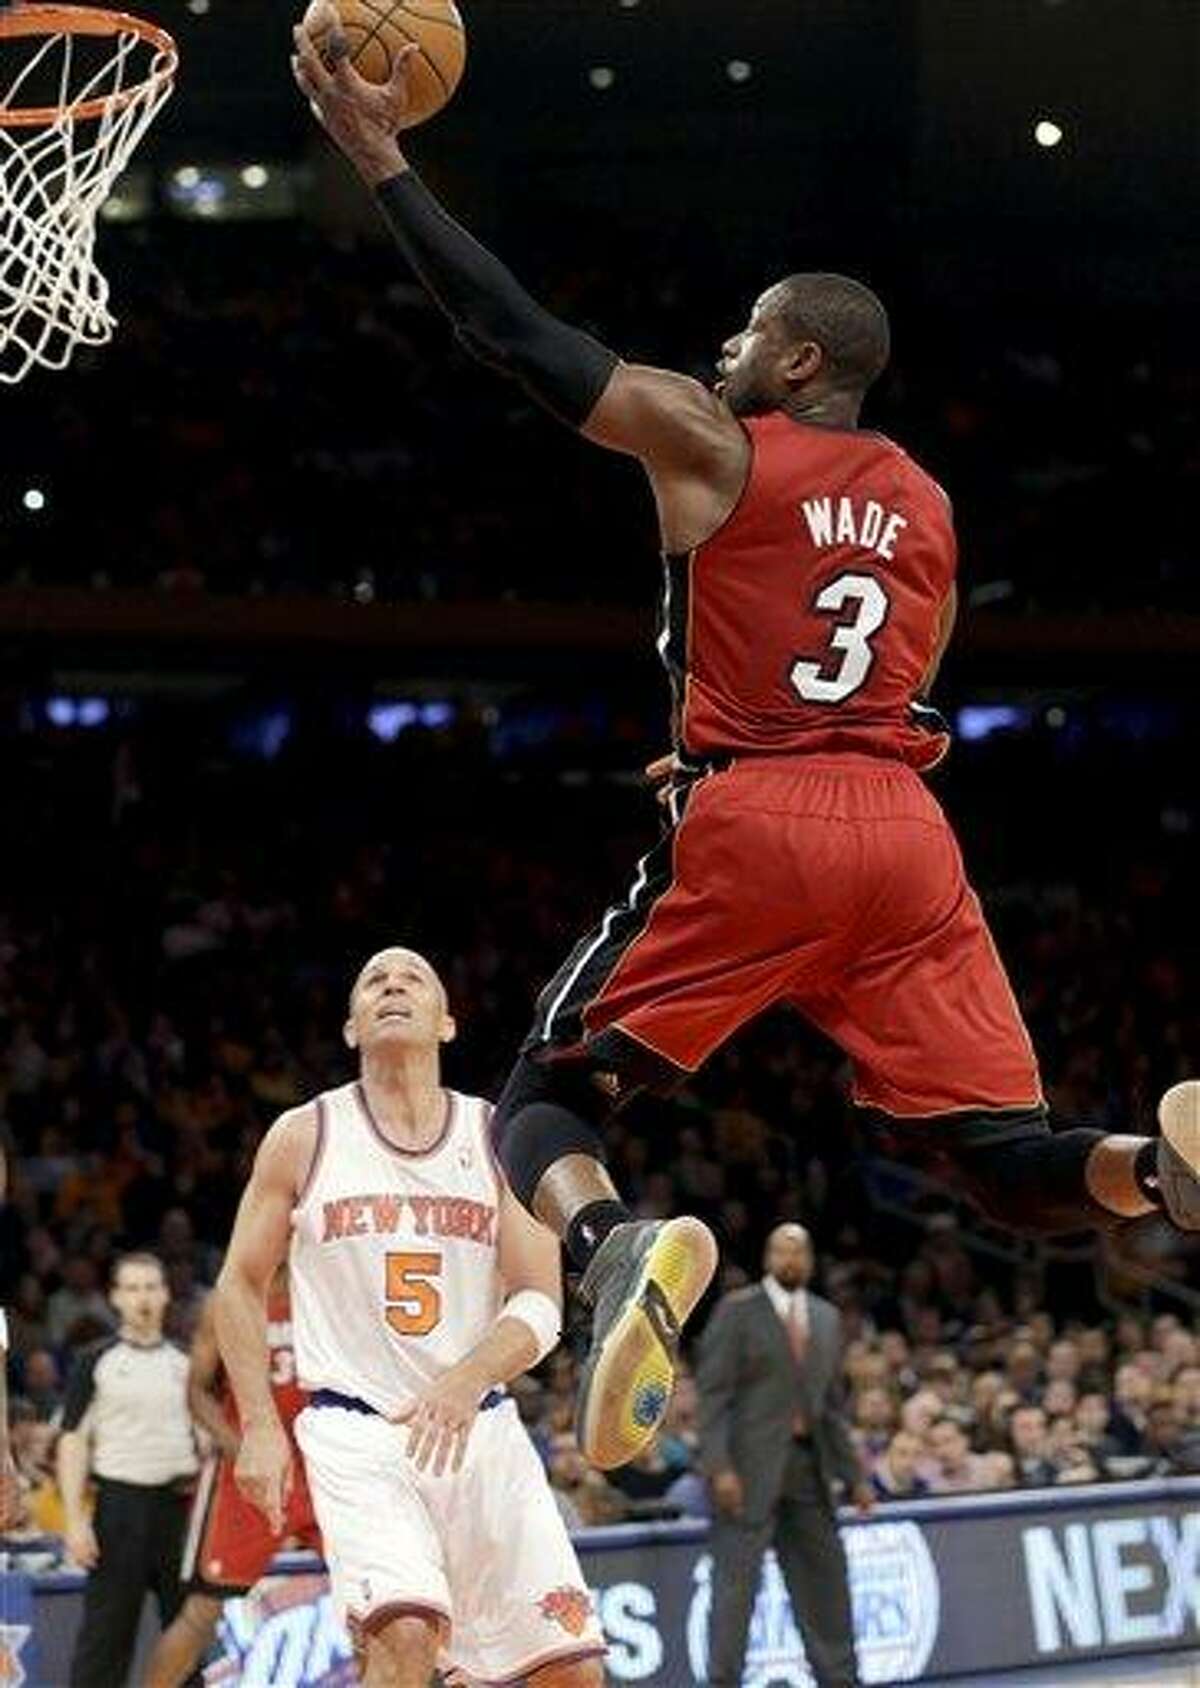 Miami Heat guard Dwyane Wade (3) shoots a layup in front of New York Knicks guard Jason Kidd (5) during the second half of their NBA basketball game at Madison Square Garden in New York, Sunday, March 3, 2013. Wade scored 20 points as the Heat won 99-93. (AP Photo/Kathy Willens)